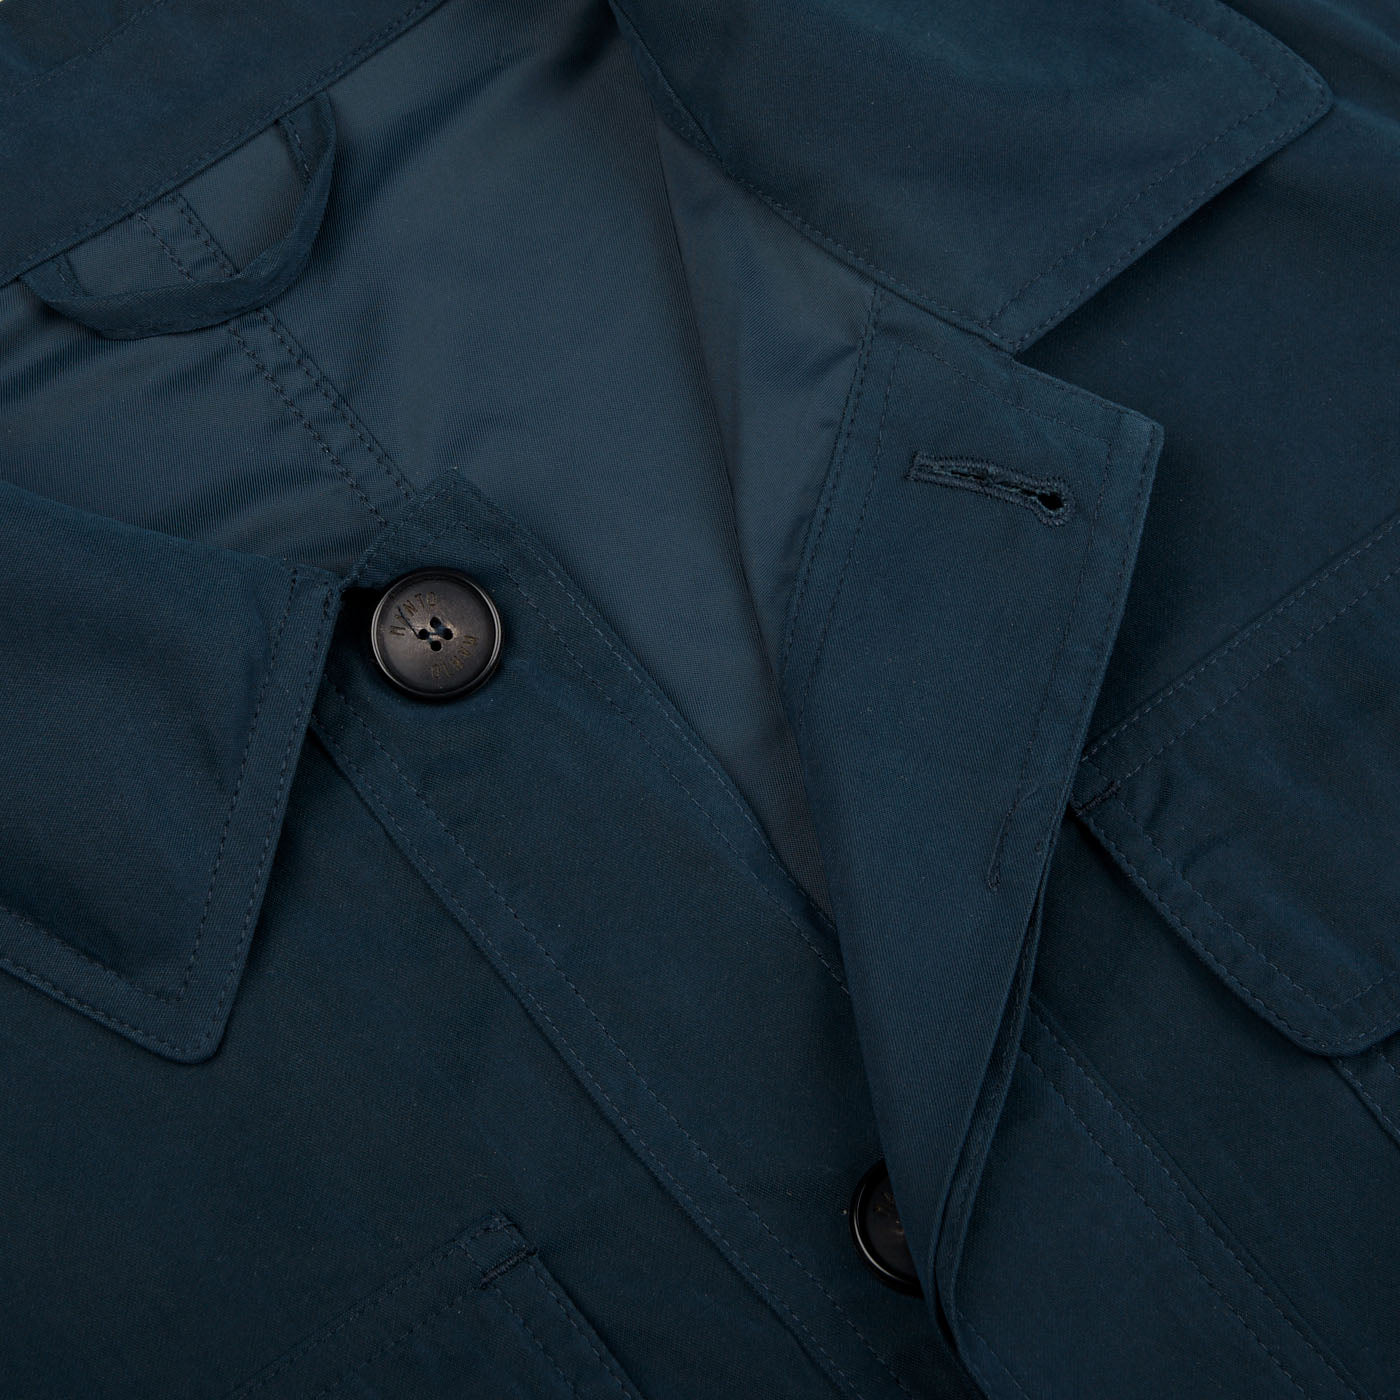 A close up of a Manto Navy Blue Ultrafine Microfiber Safari Jacket with buttons.